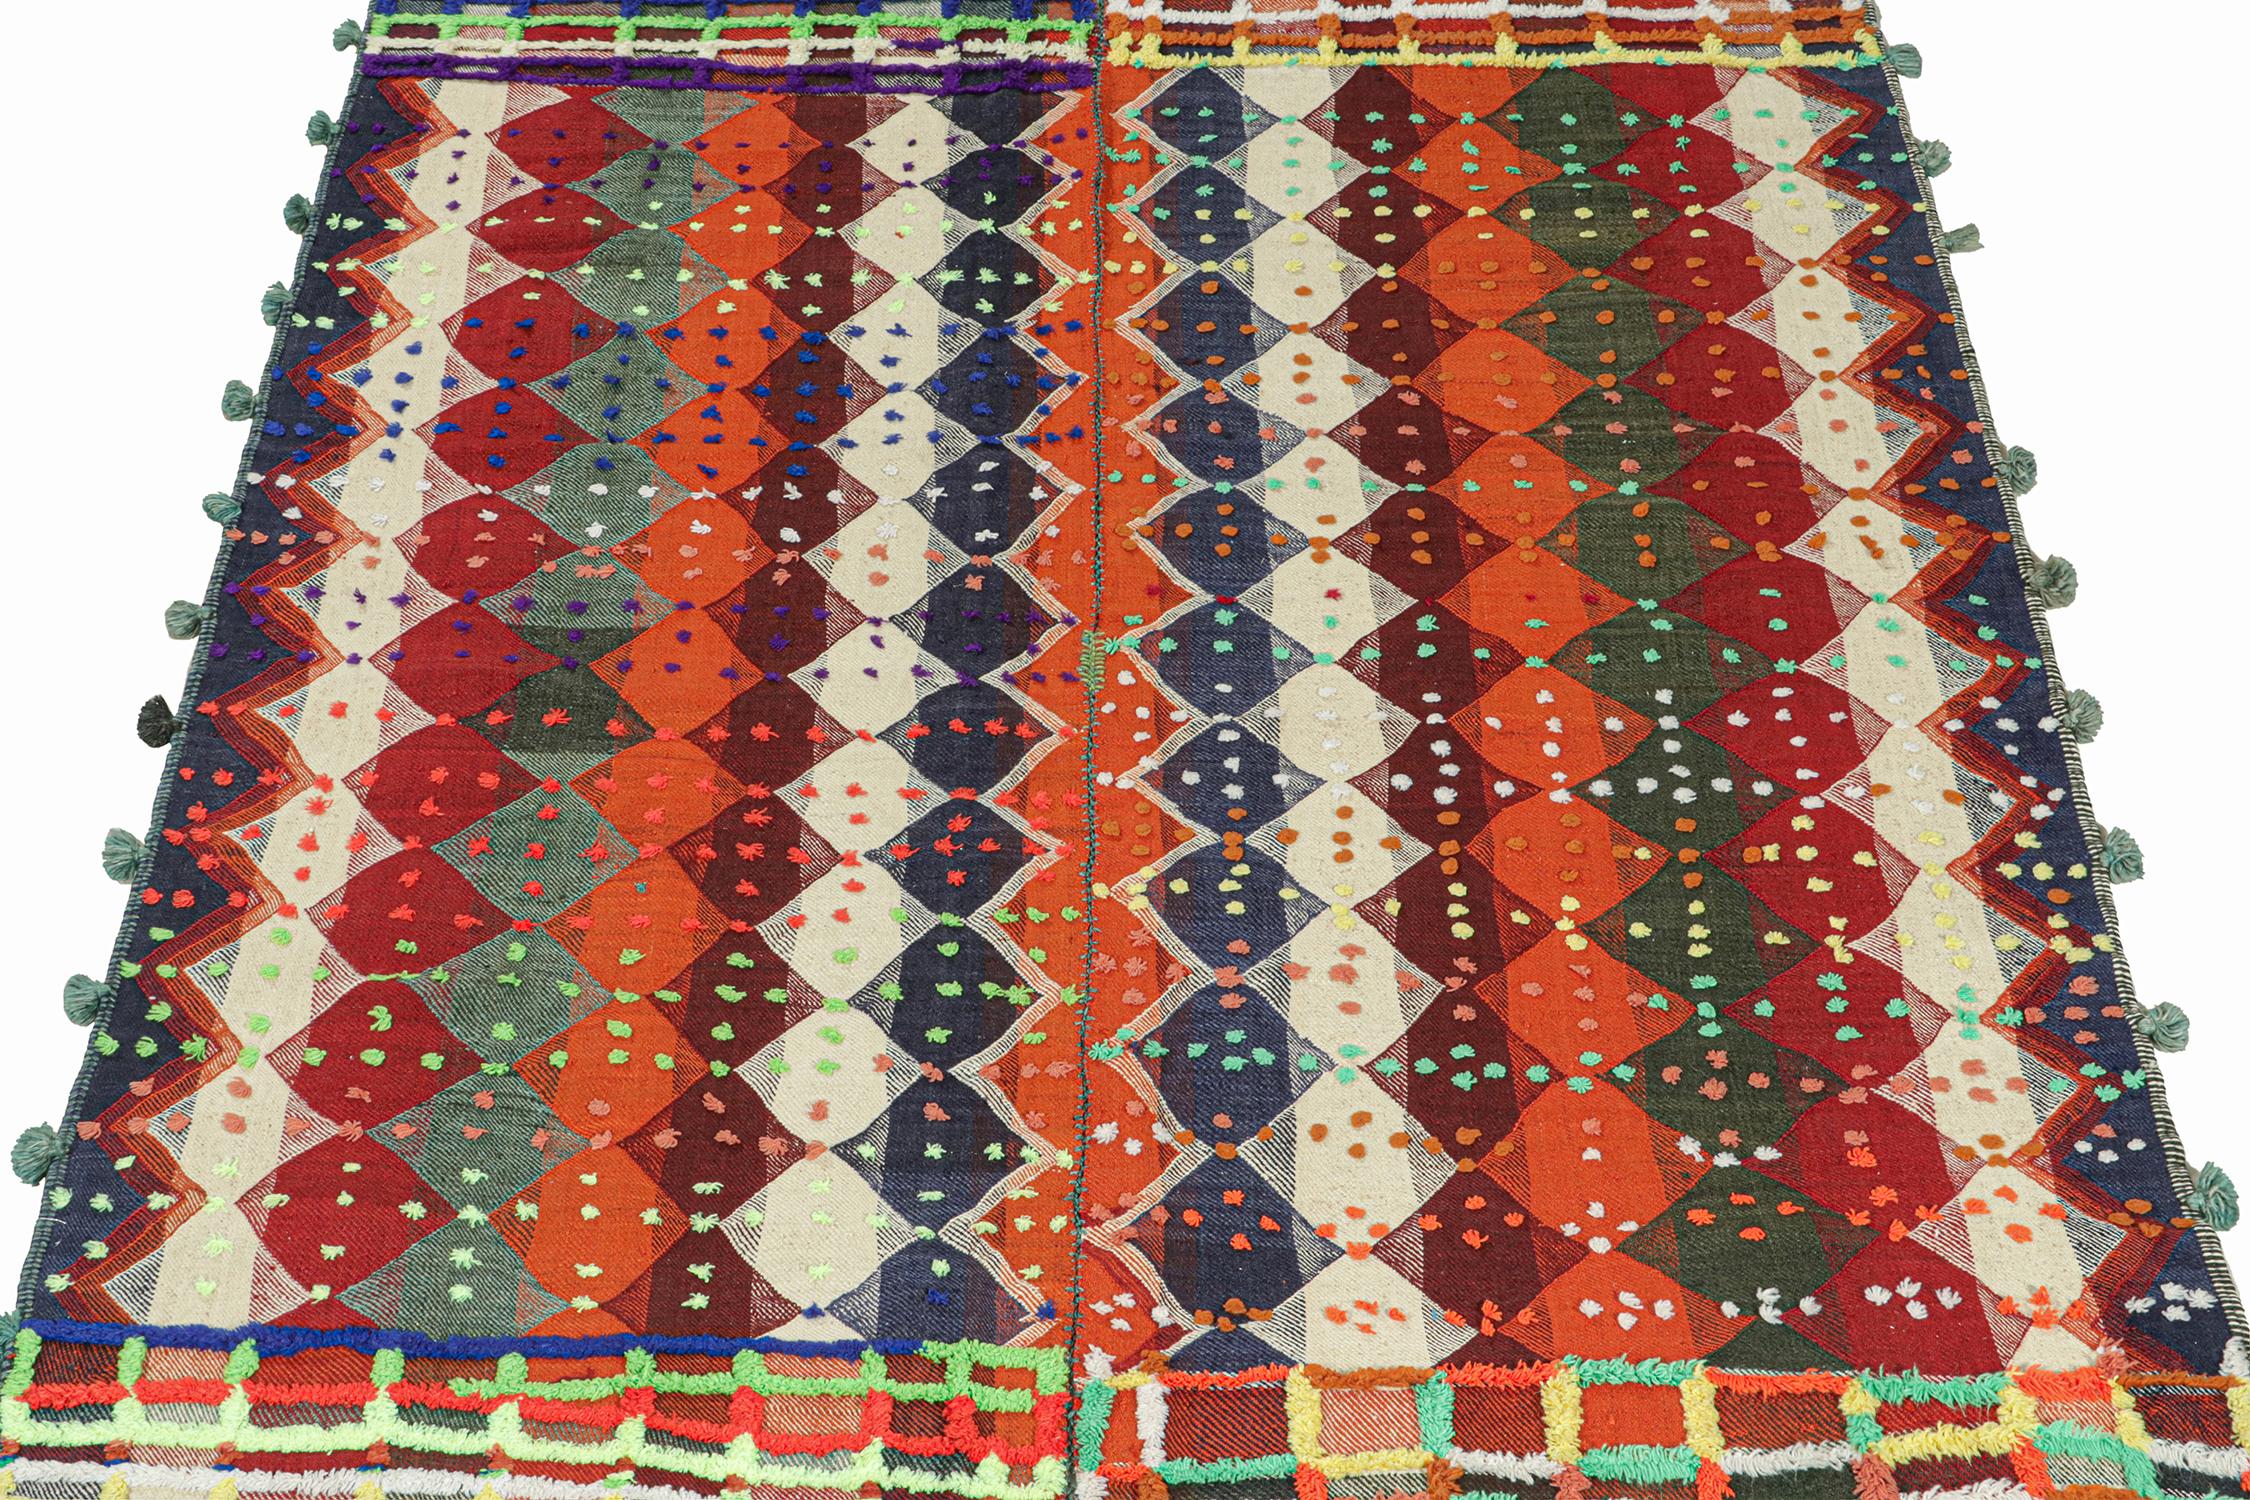 This vintage 6x9 Persian kilim rug is handwoven in wool, and originates circa 1950-1960.

Its design is a panel-weave, in which tribal weaves combine two or more flat weaves into one larger piece. This particular piece enjoys rich and vibrant